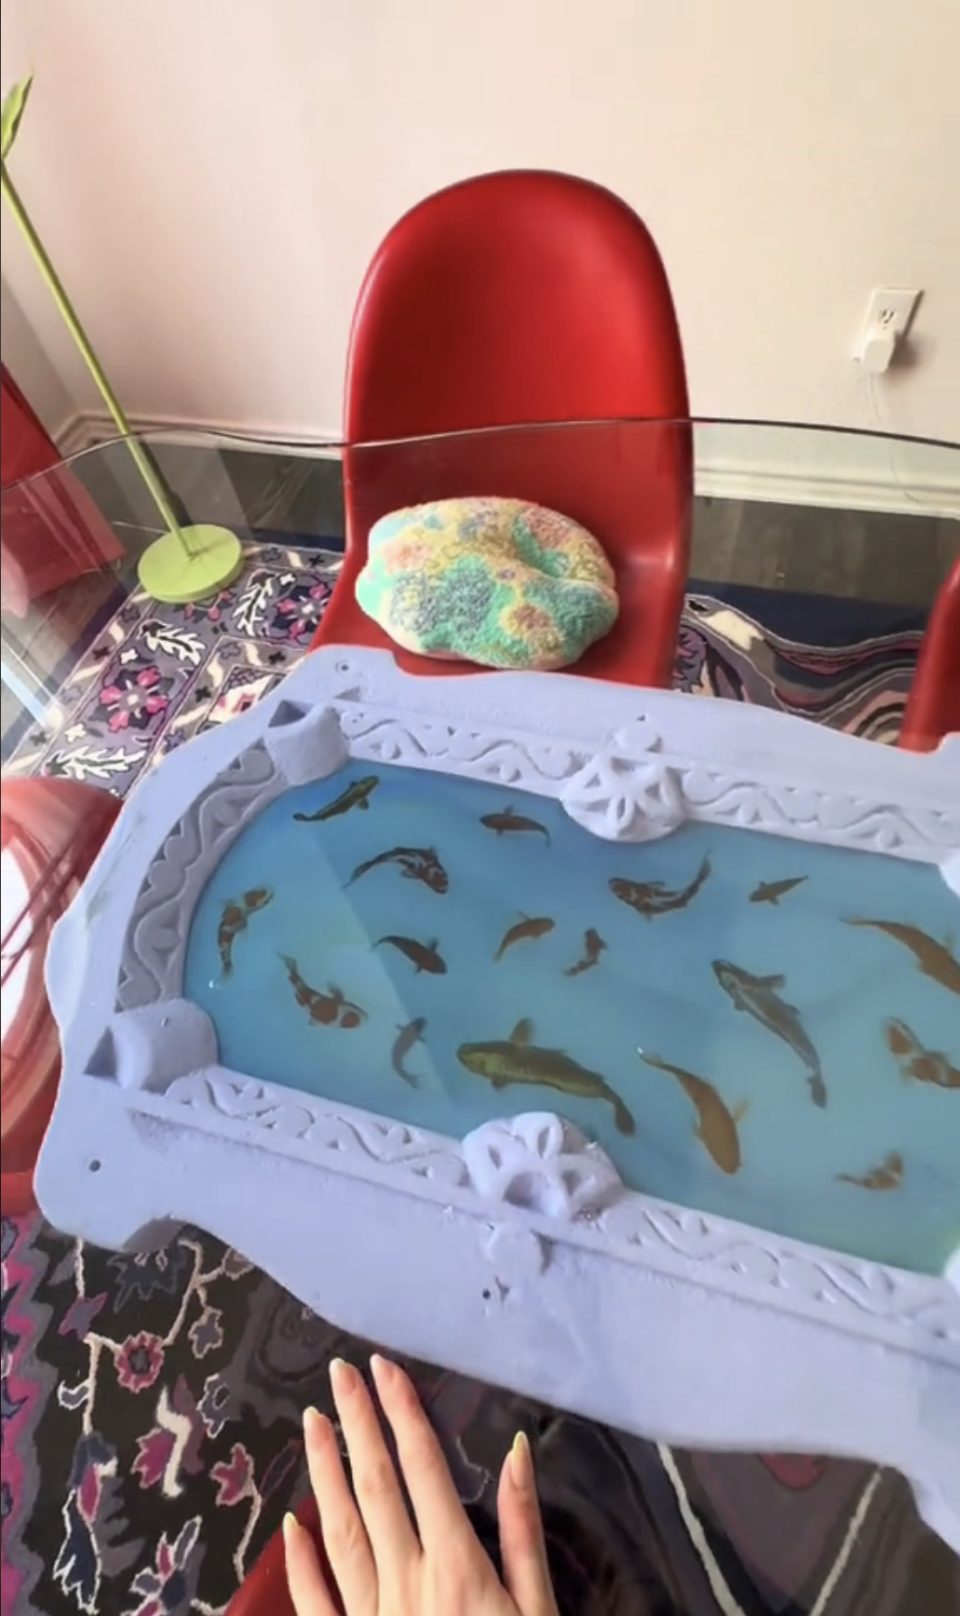 A unique aquarium coffee table with various fish, surrounded by home furnishings